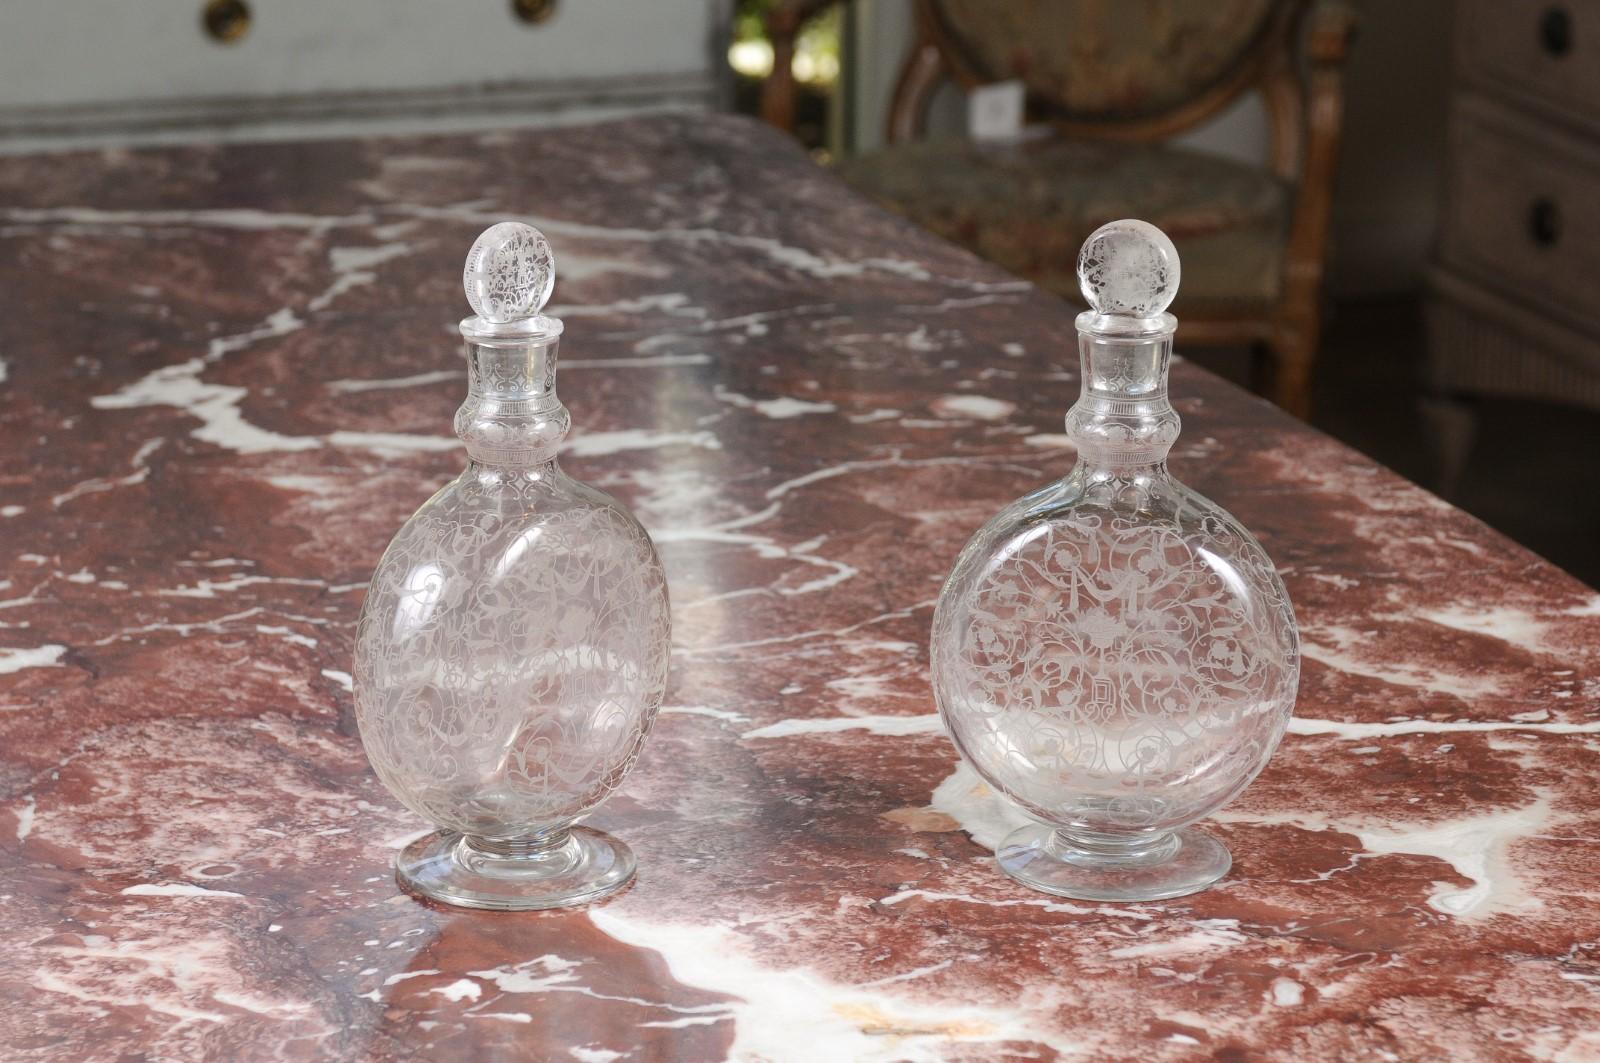 A pair of French Louis-Philippe period Baccarat crystal carafes from the mid-19th century, with etched decor. Born in the eastern town of Baccarat during the first half of the 19th century, each of this pair of carafes features a circular body